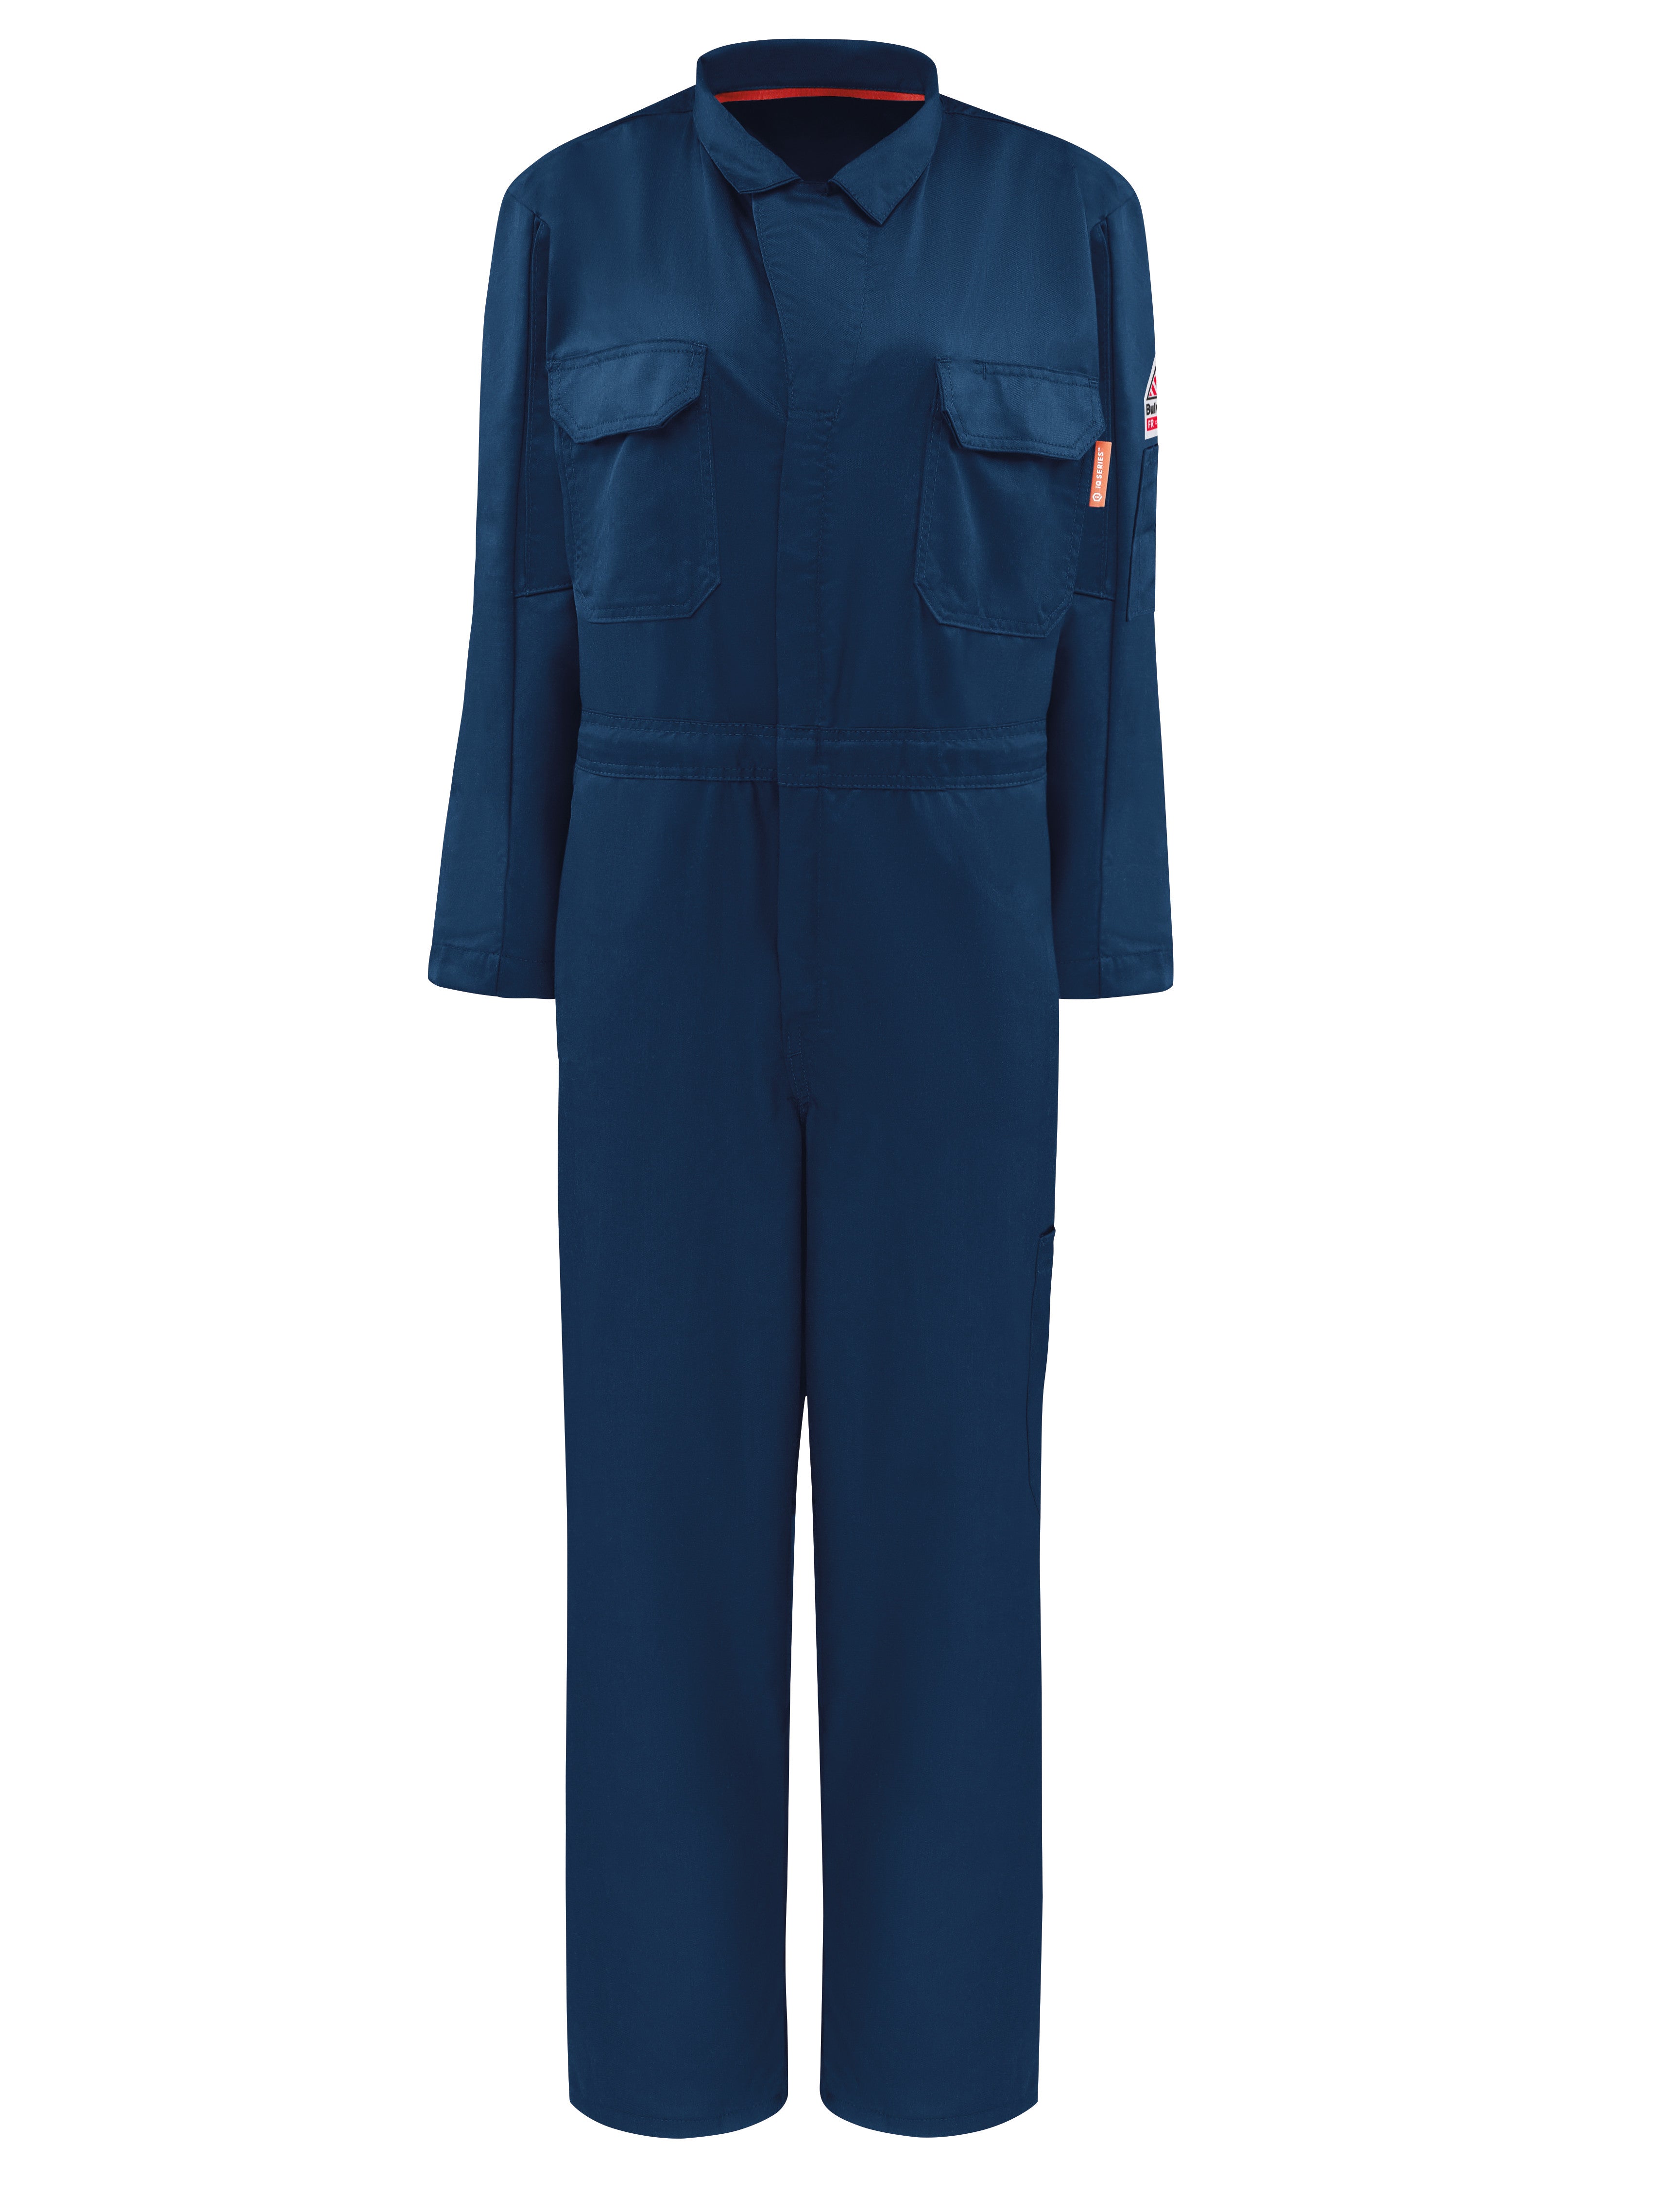 iQ Series Women’s Midweight Mobility Coverall QC23 - Navy-eSafety Supplies, Inc